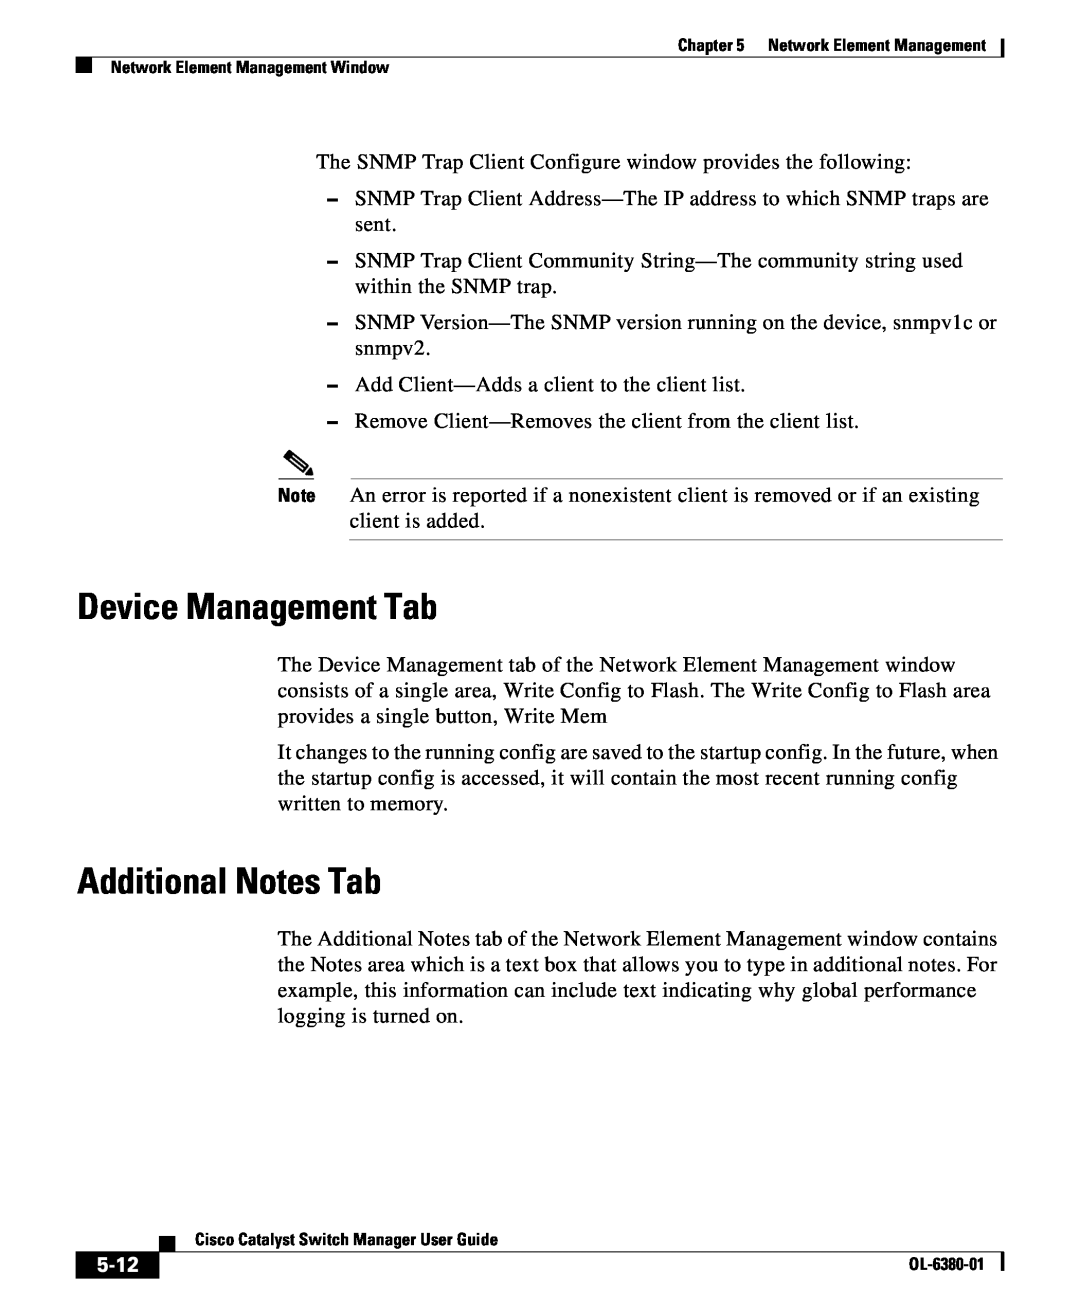 Cisco Systems OL-6380-01 manual Device Management Tab, Additional Notes Tab, 5-12 